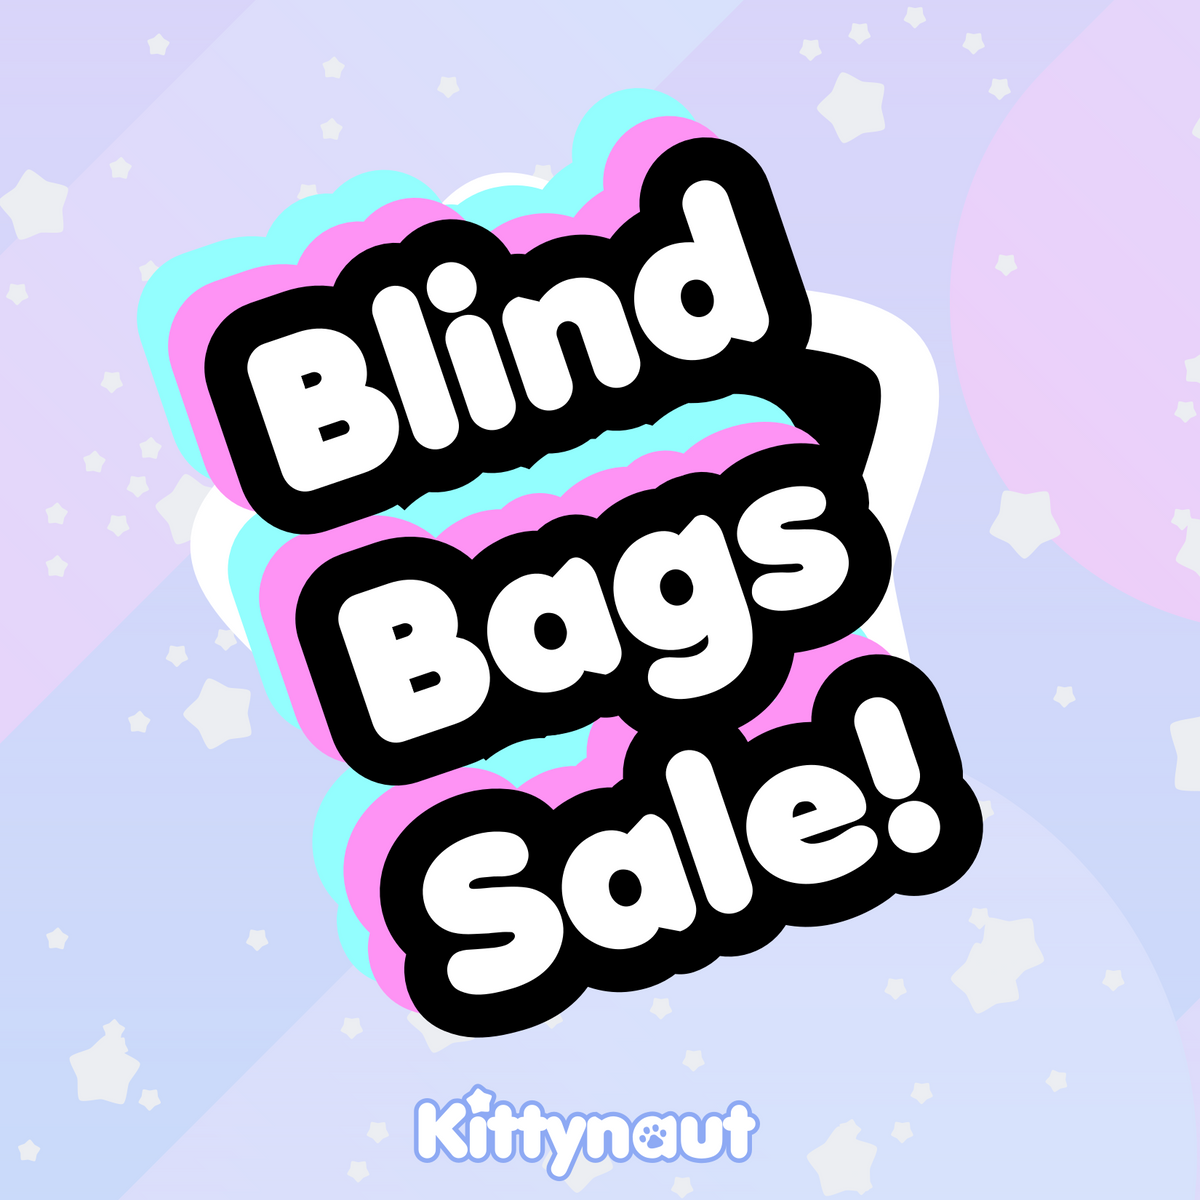 blind bags for sale